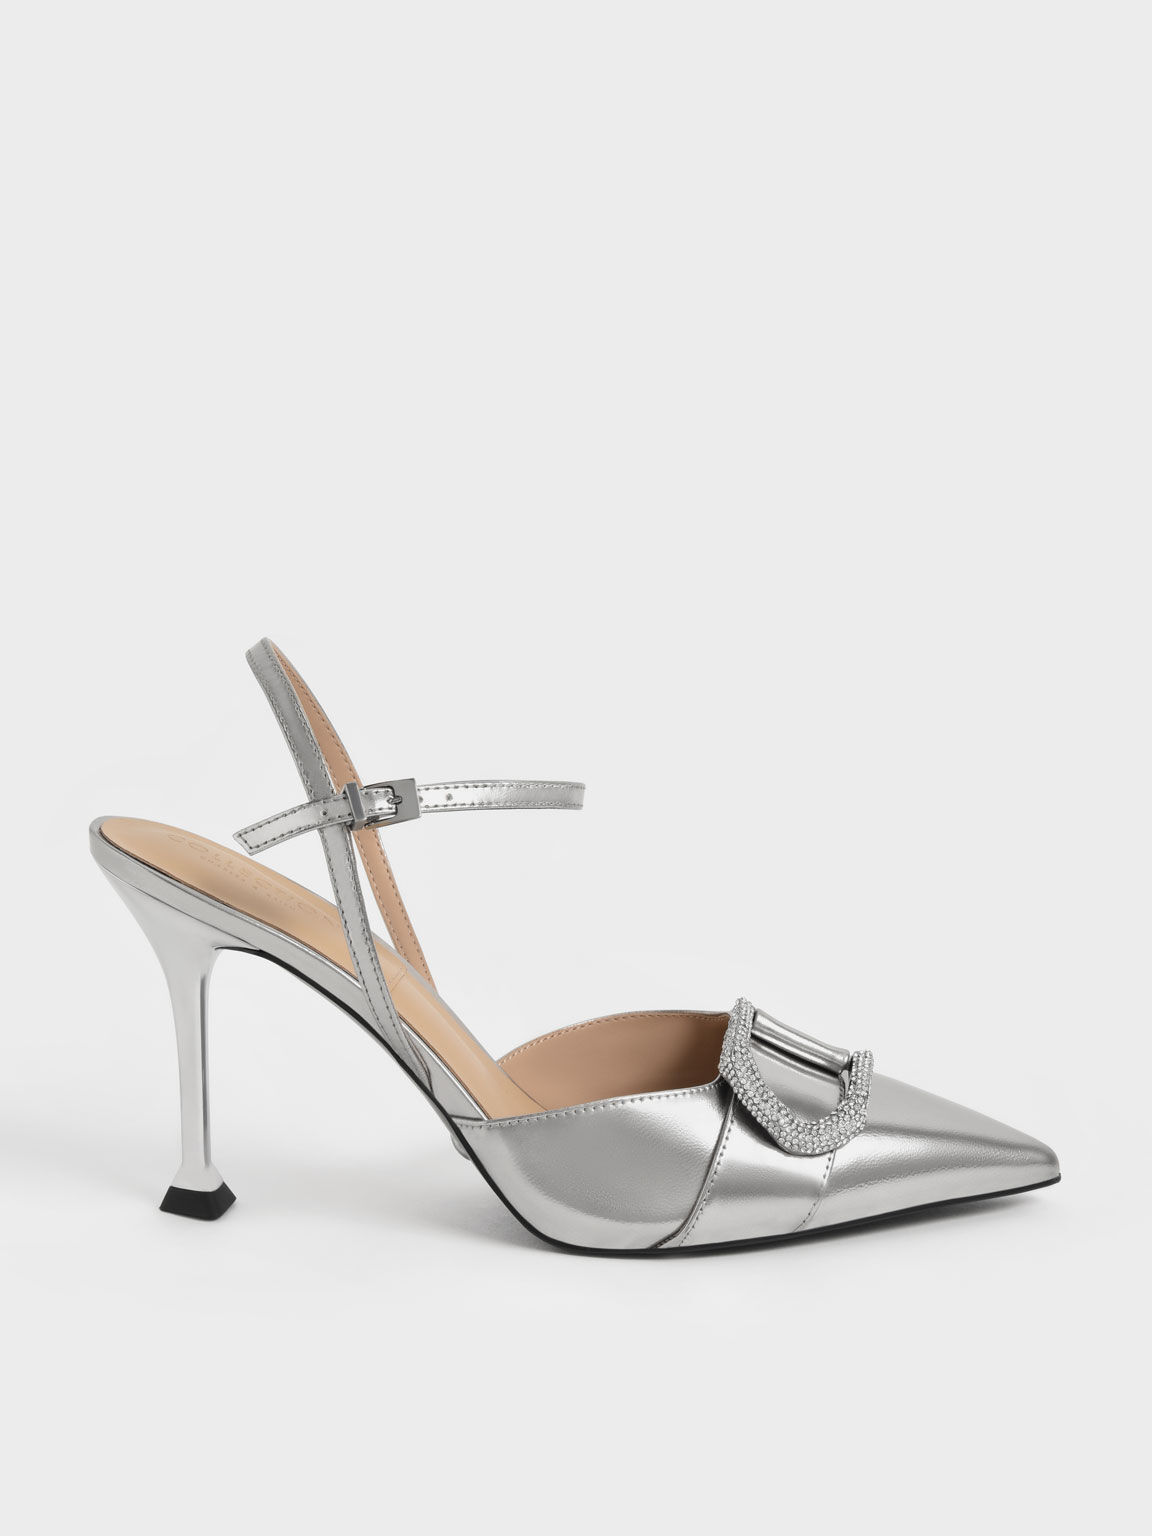 Signature Collection | Shop Women’s Shoes - CHARLES & KEITH SG